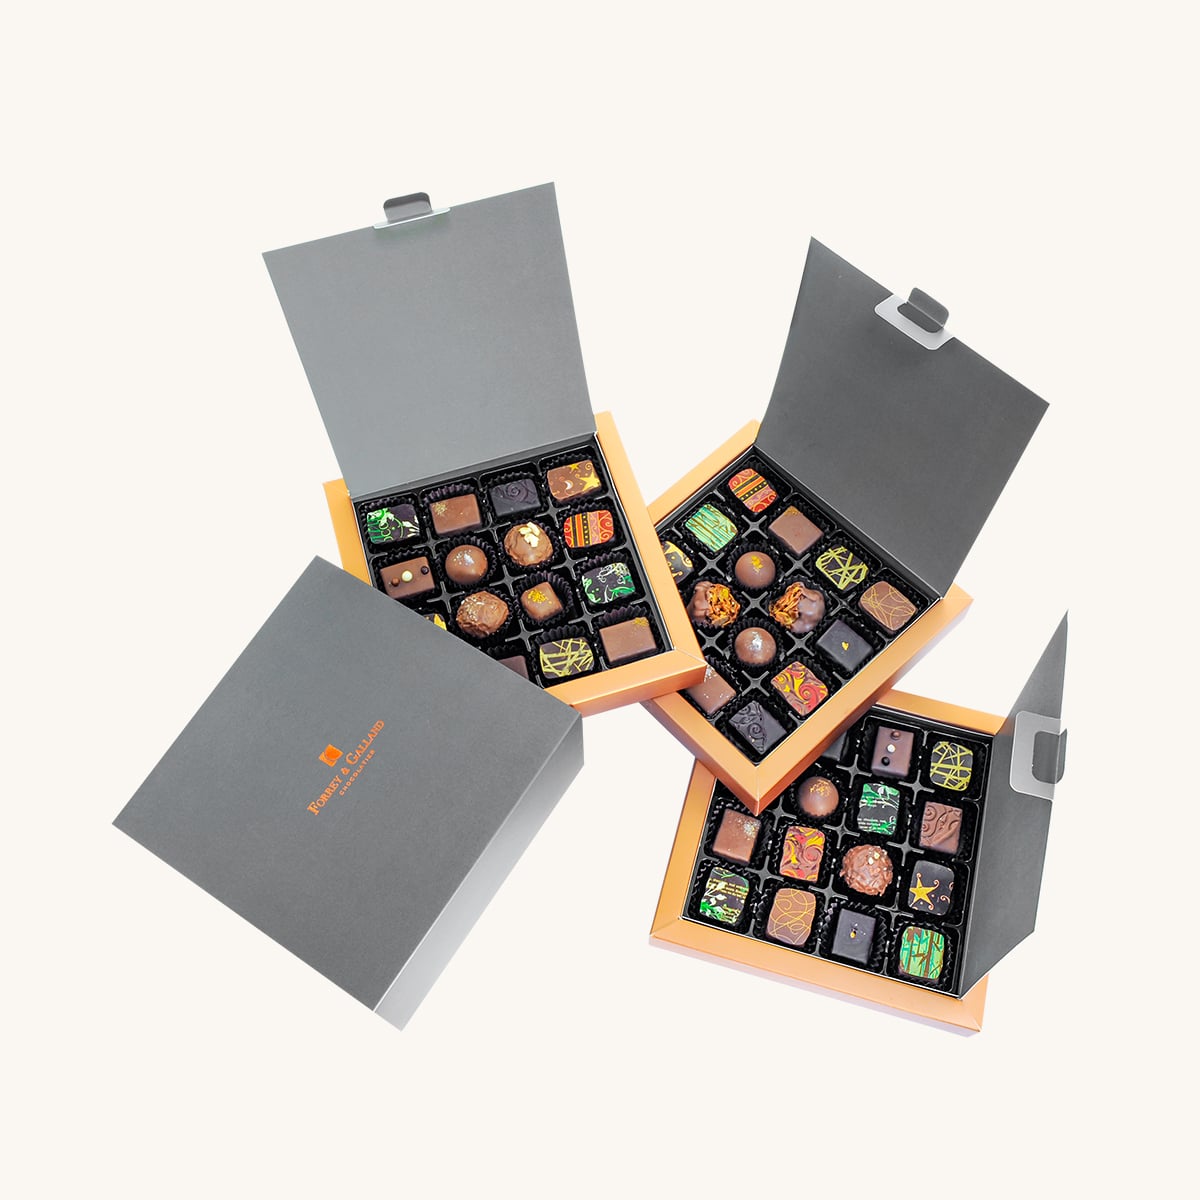 Forrey & Galland premium classic chocolate box filled with 48 pieces of handmade chocolates.